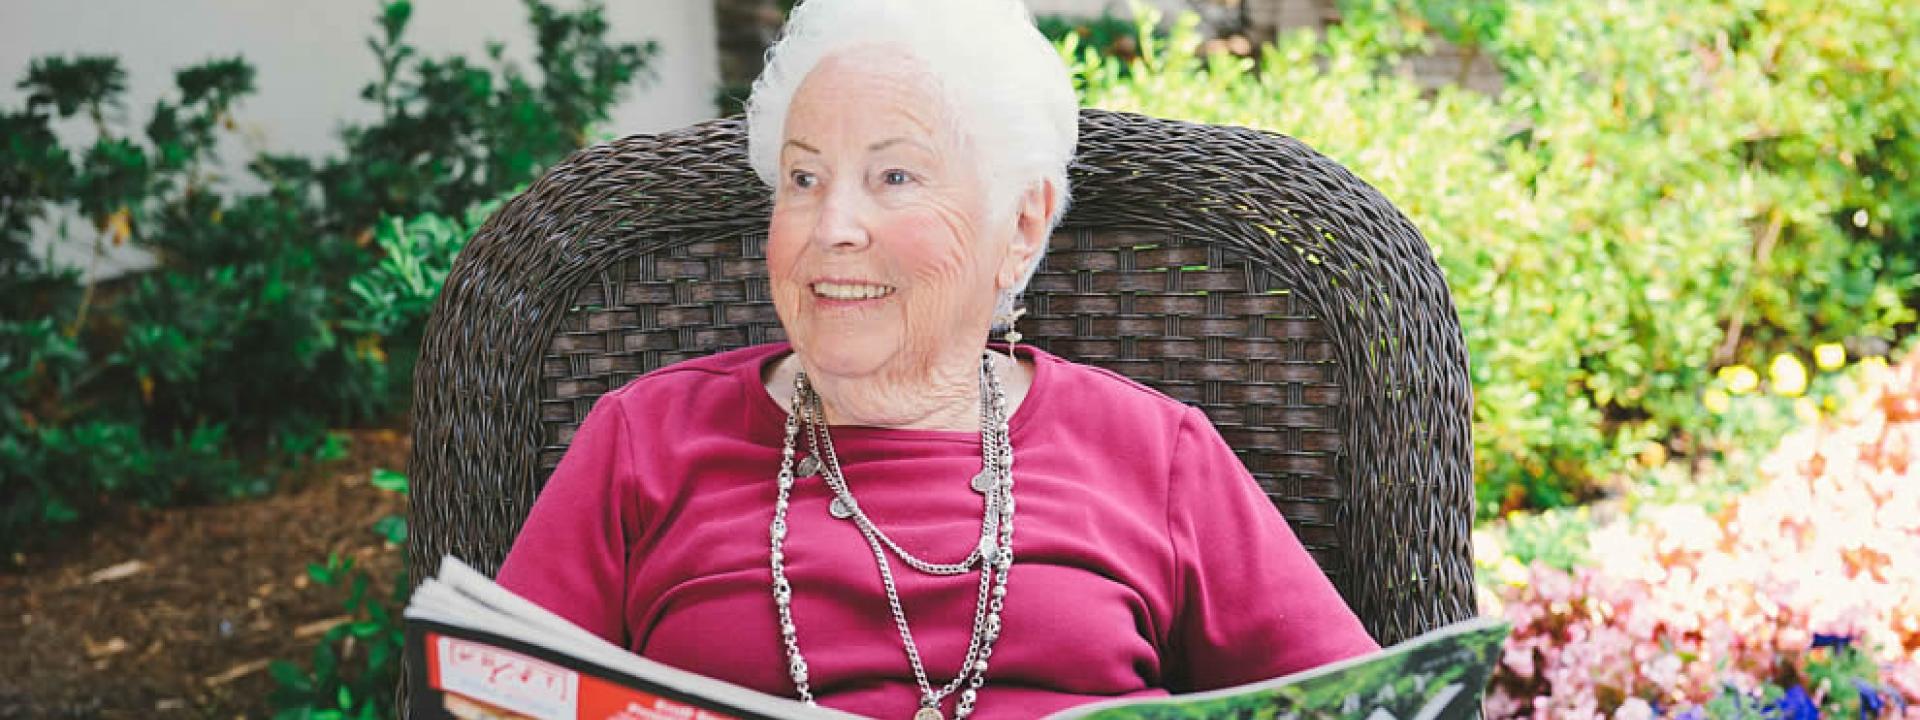 Smiling woman resident sitting in a brown rattan patio chair reading a magazine.